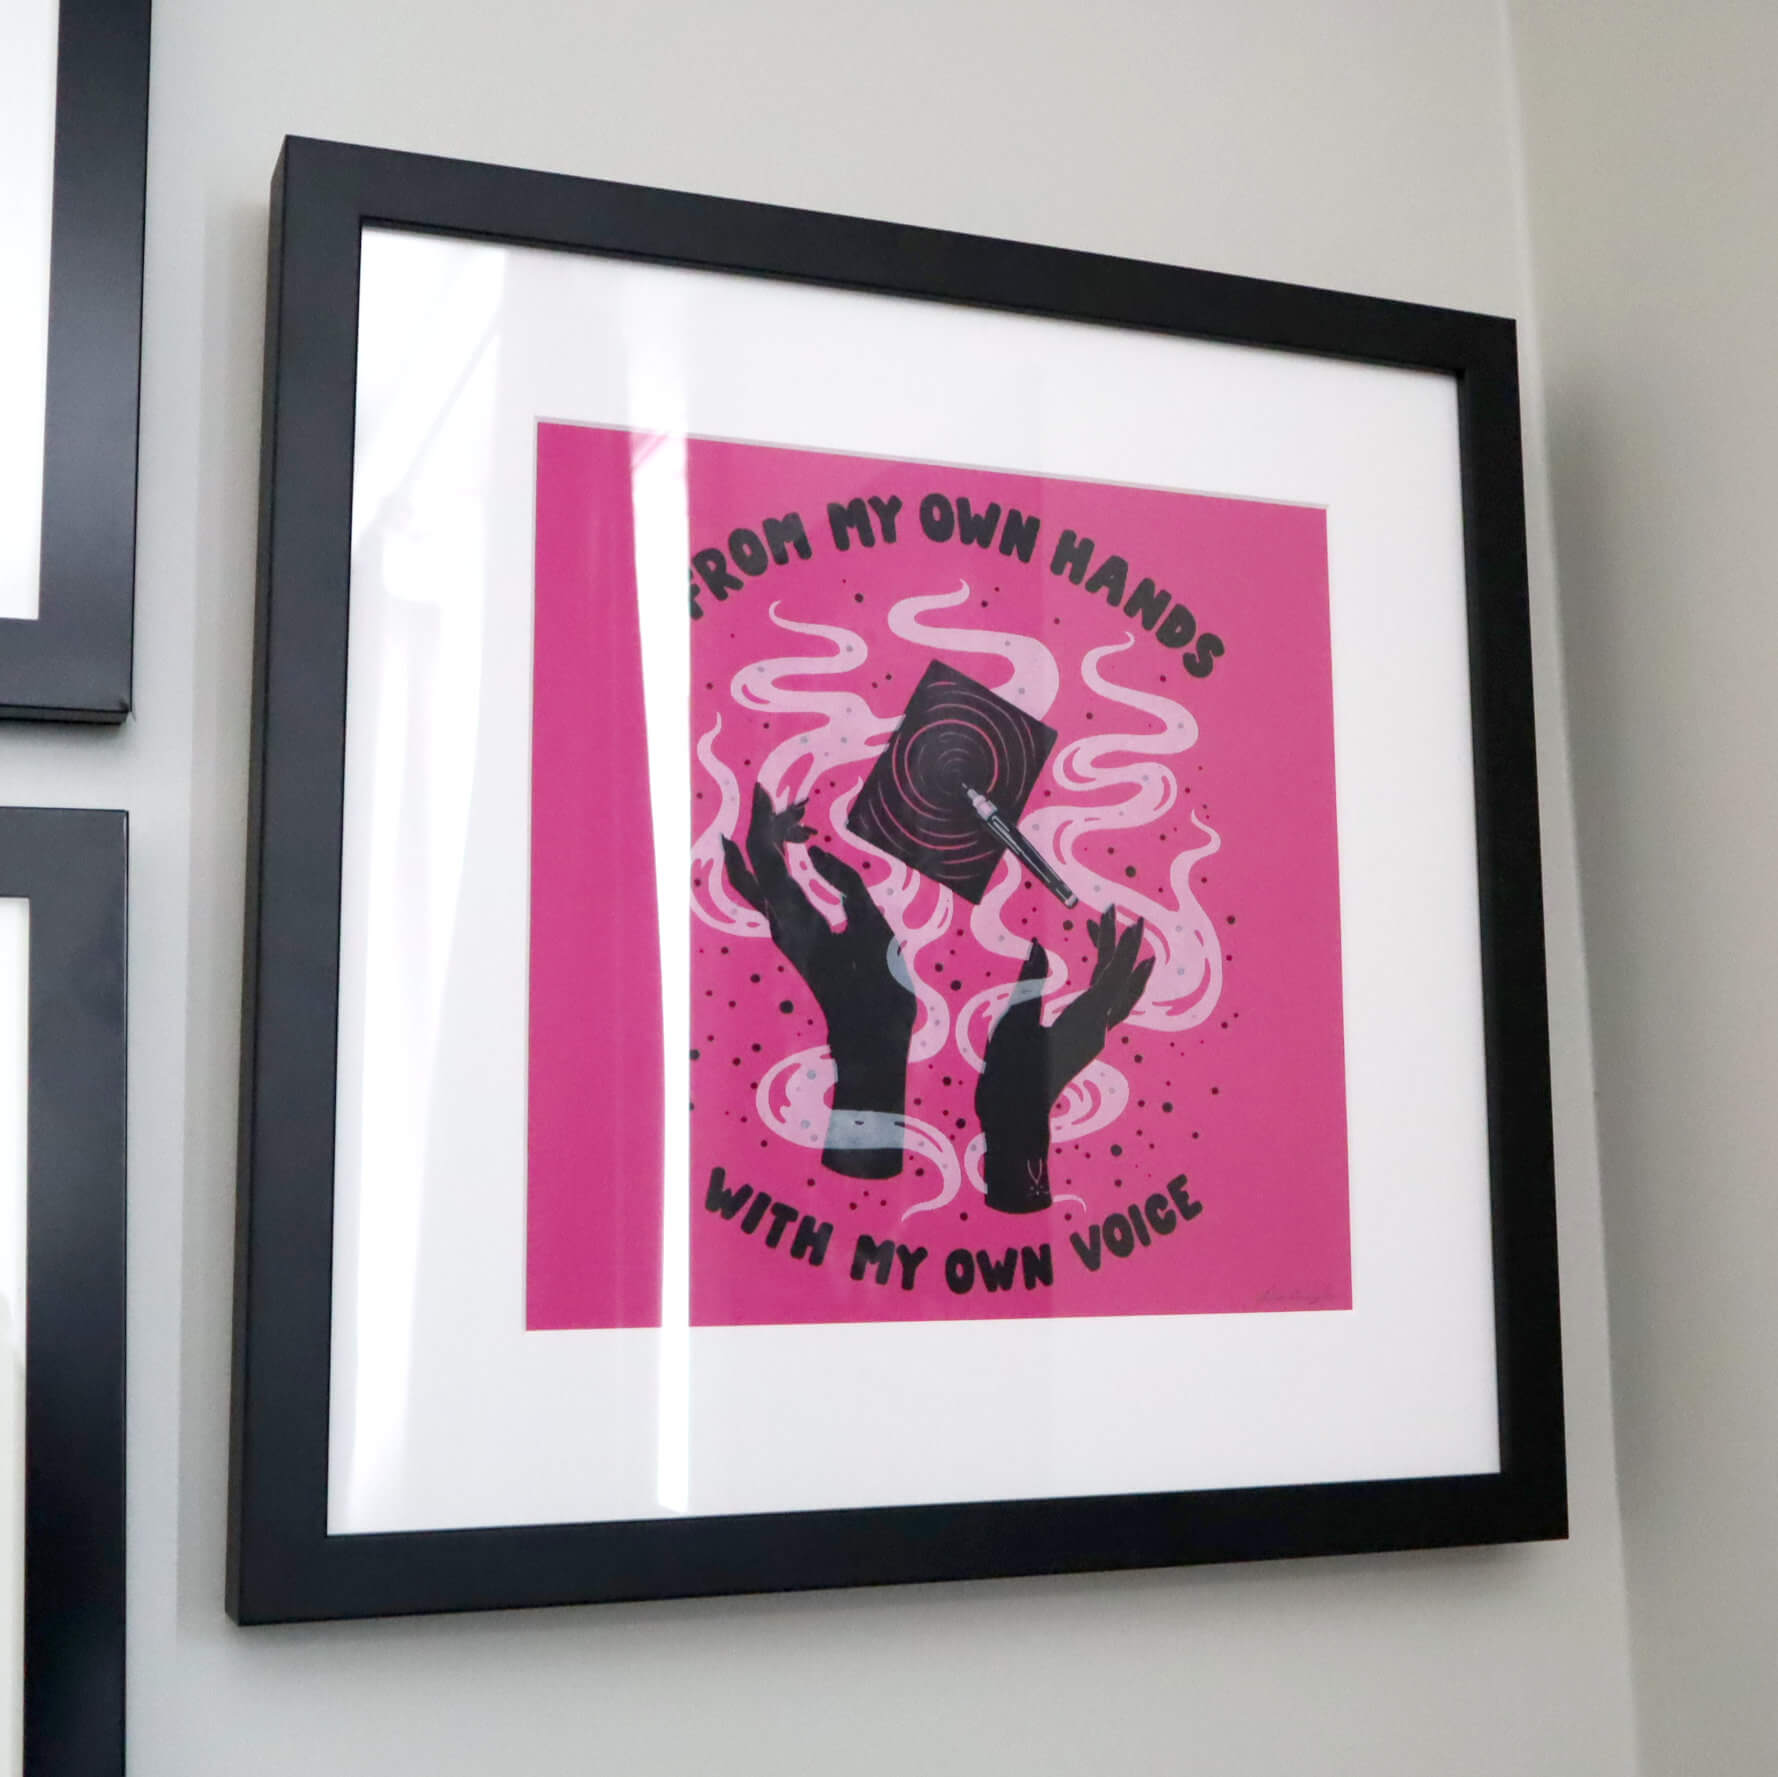 A framed artwork hung on the wall, with the words From My Own Hands, With My Own Voice emblazoned on hot pink paper.